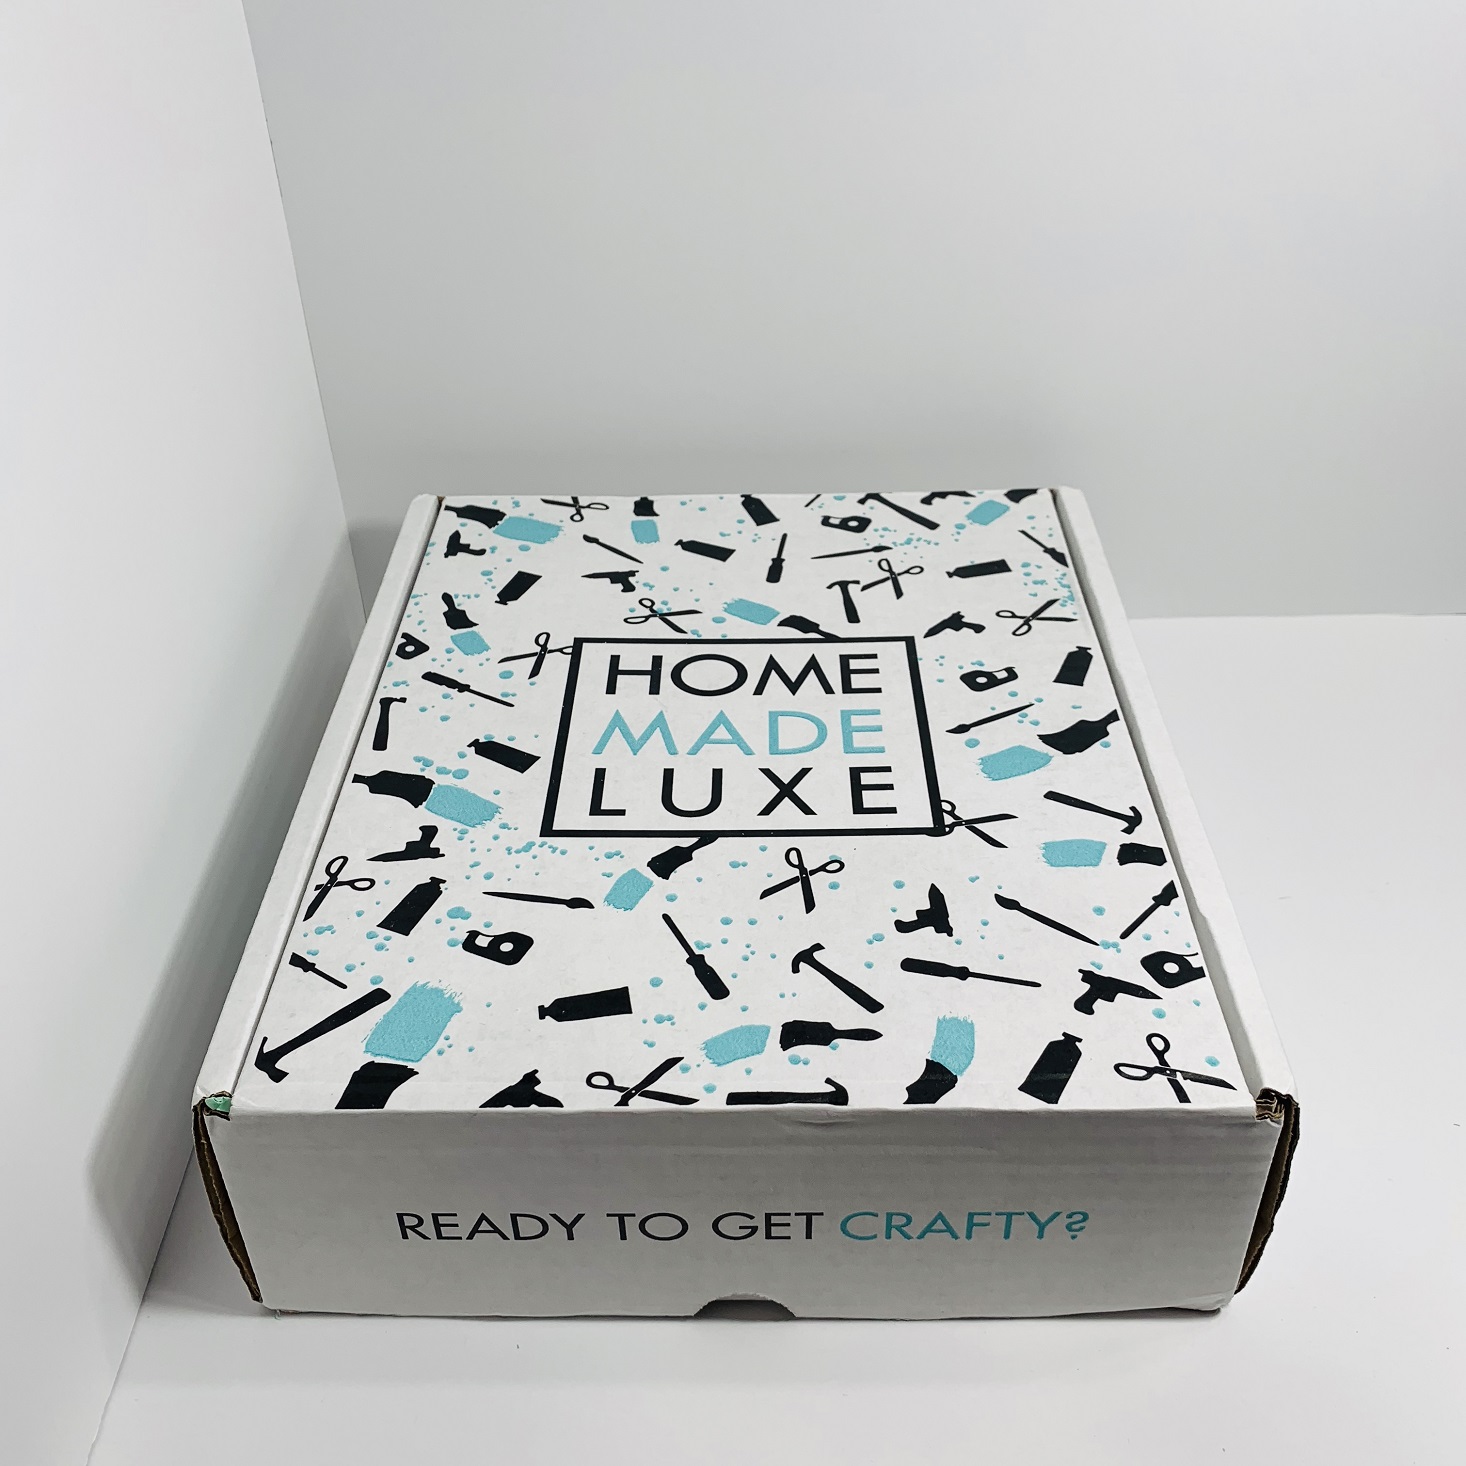 Home Made Luxe Subscription Box Review – August 2019